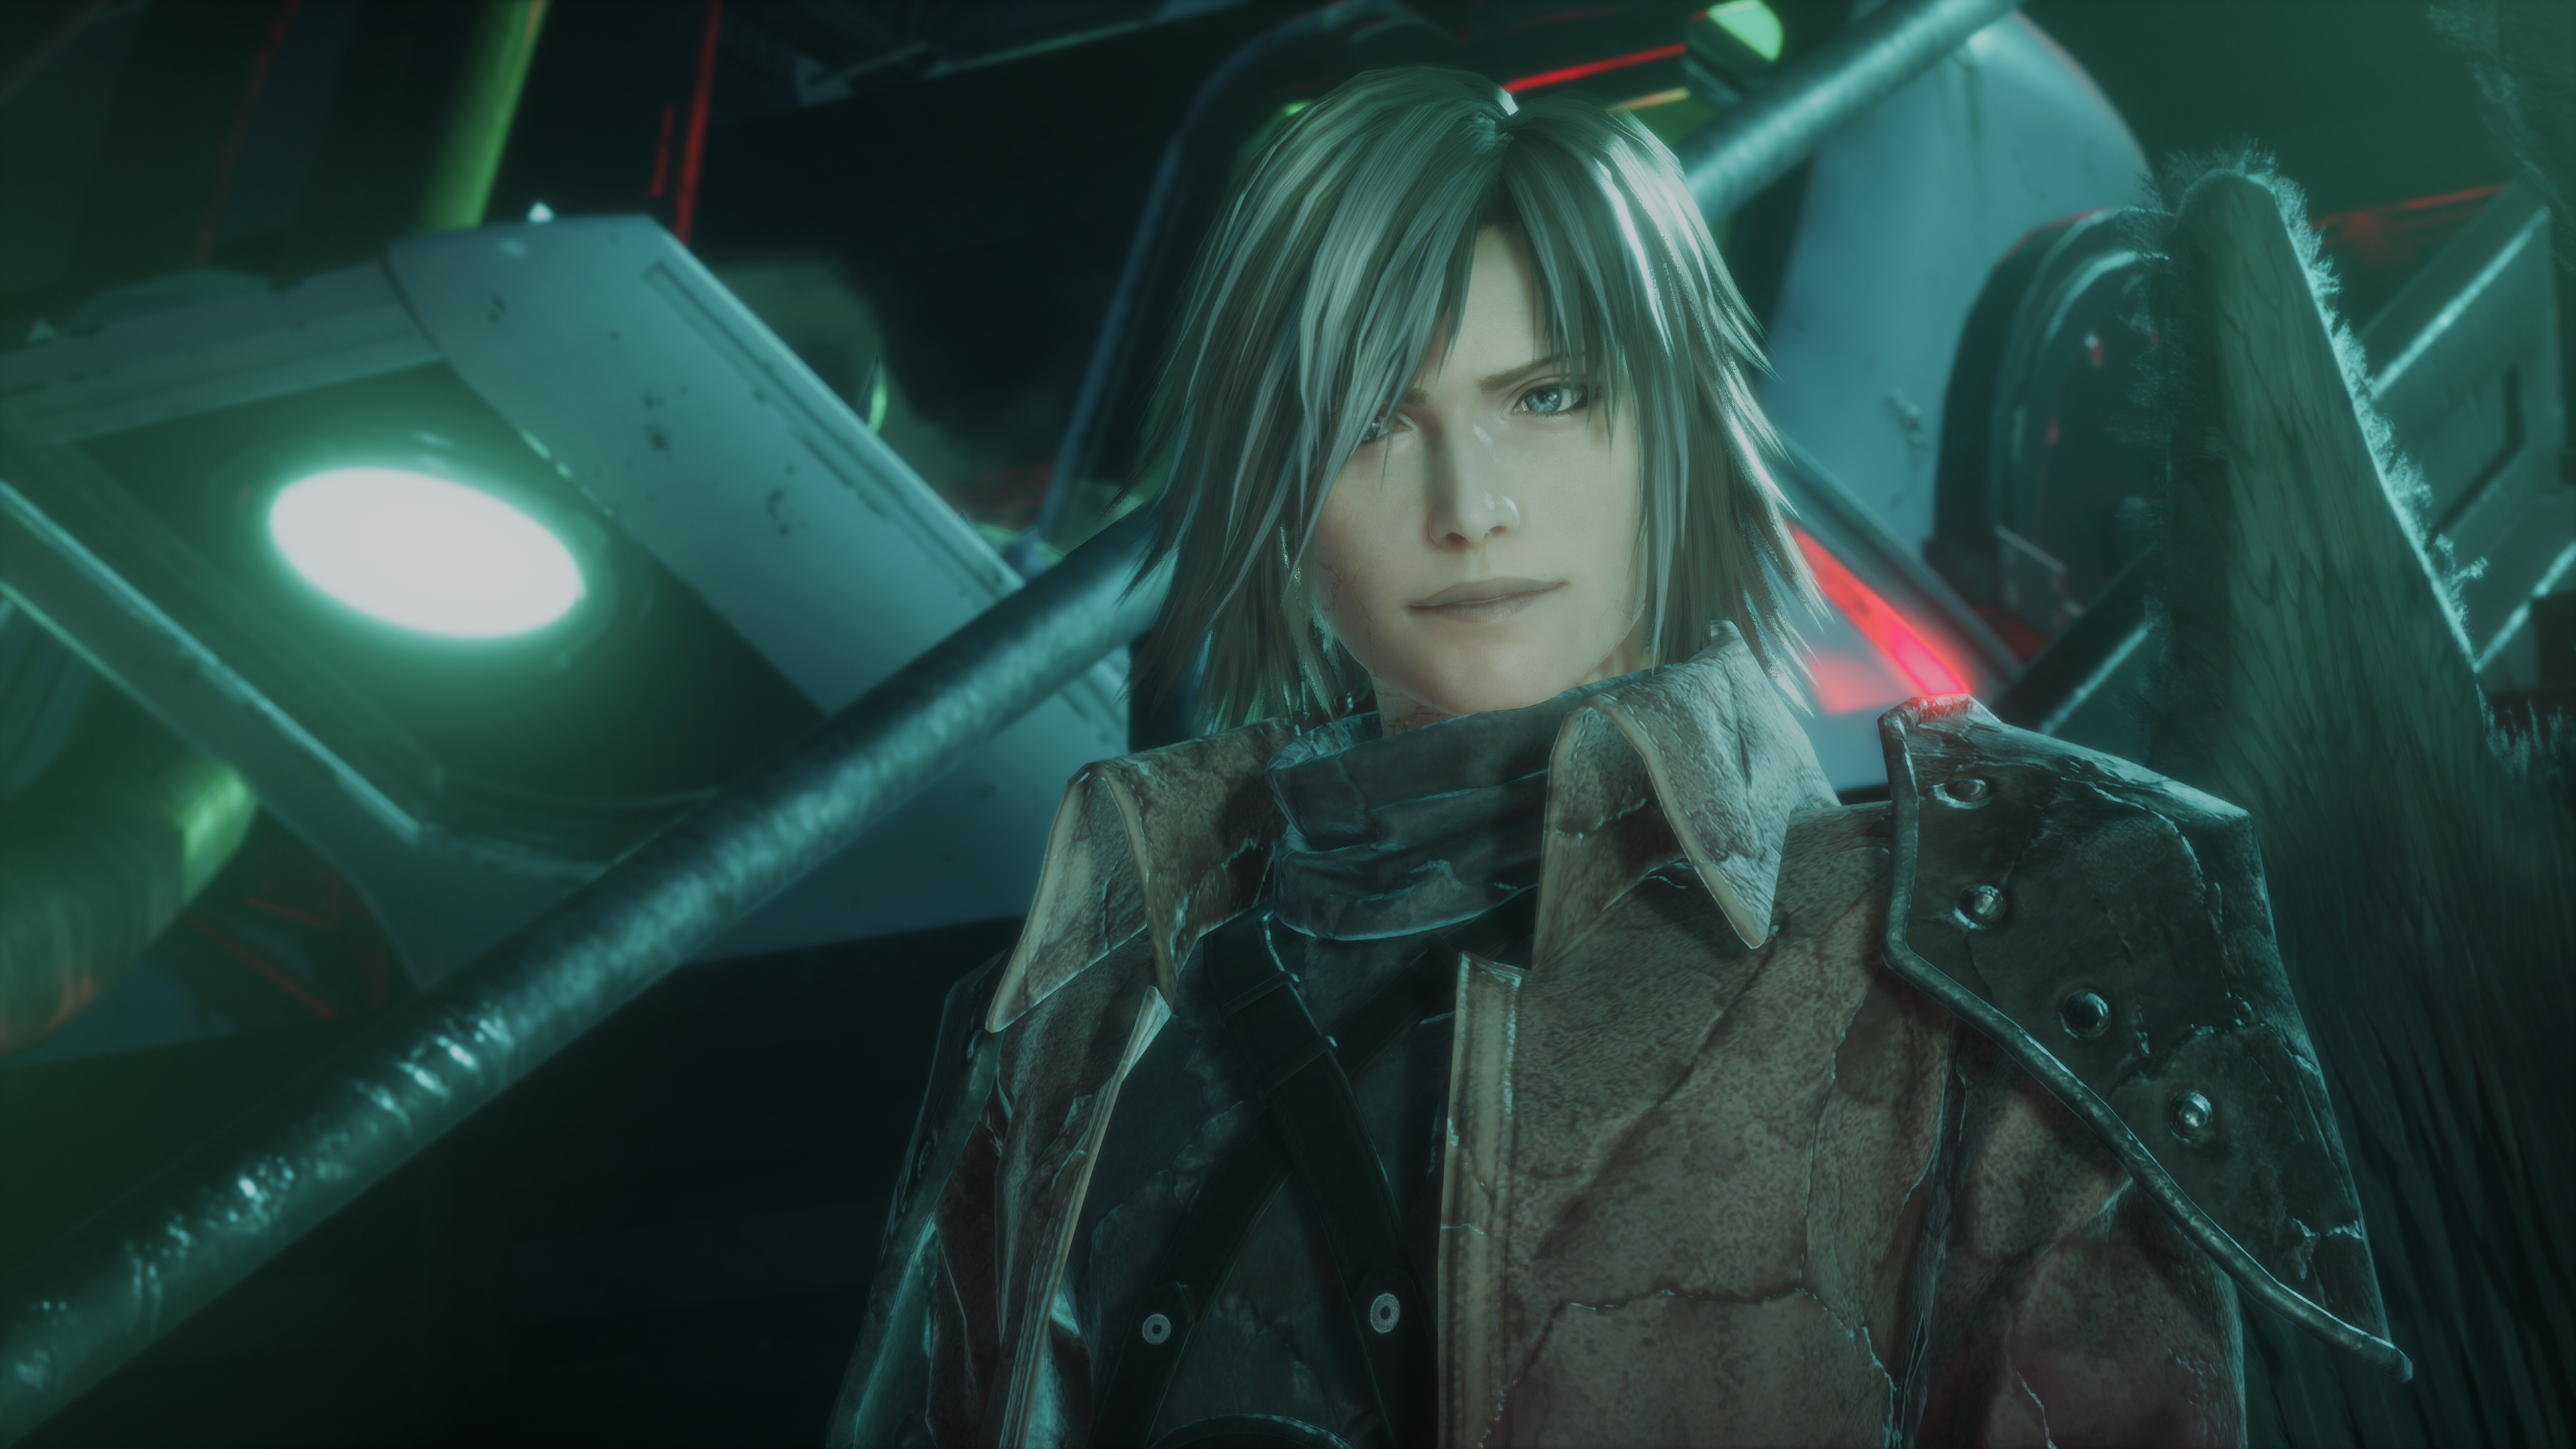 Everything new we've learned about Crisis Core: Final Fantasy VII Reunion